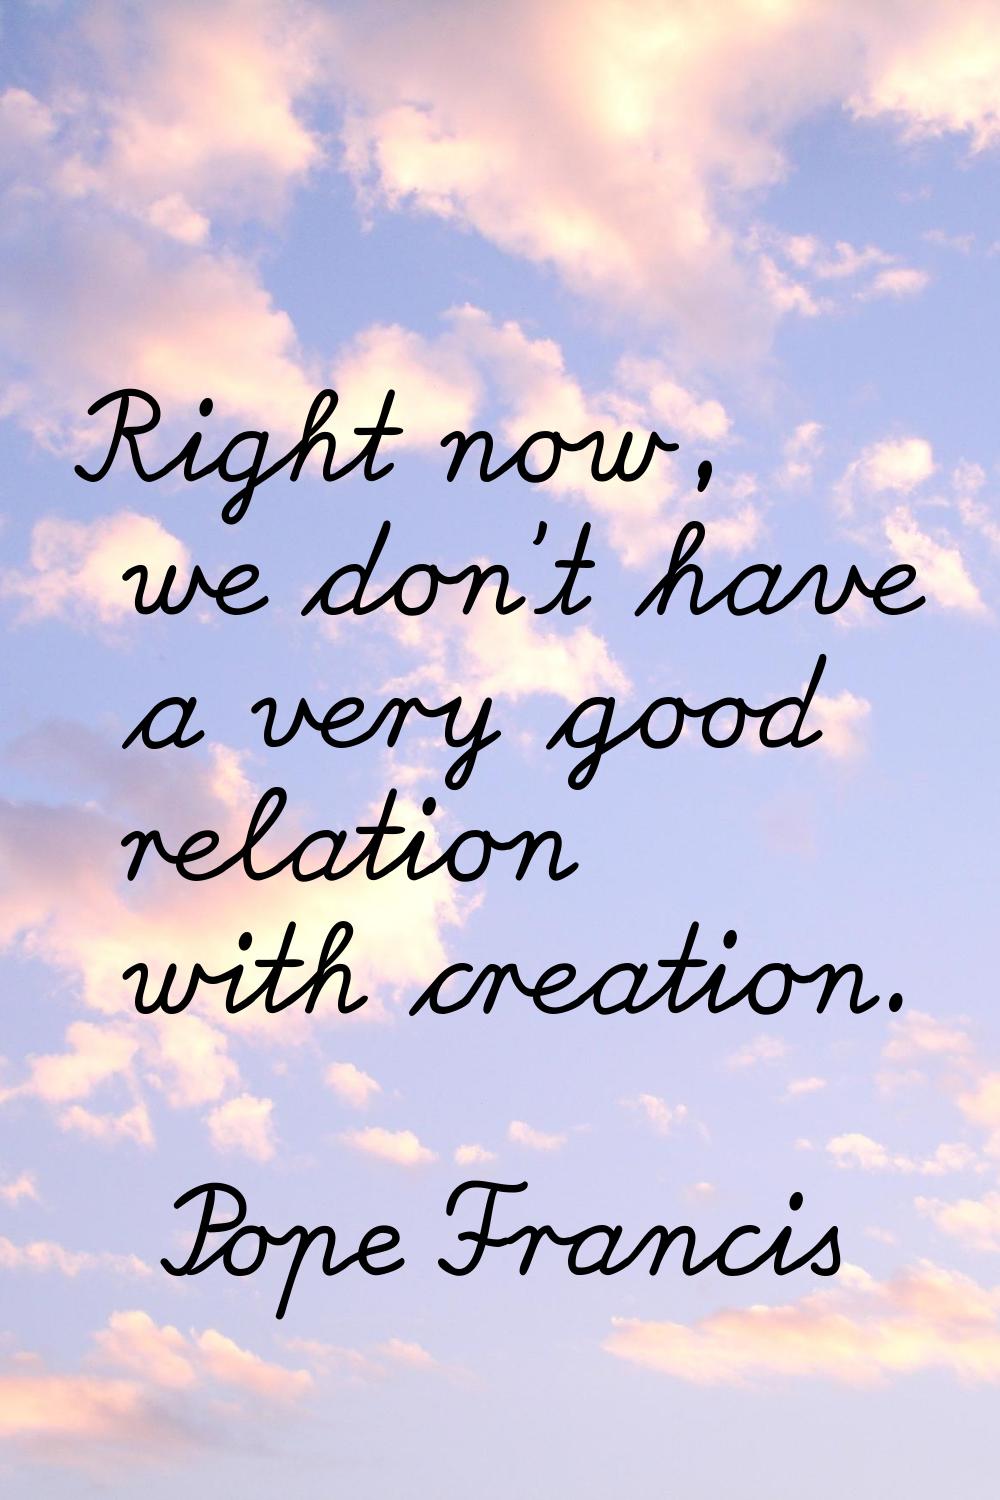 Right now, we don't have a very good relation with creation.